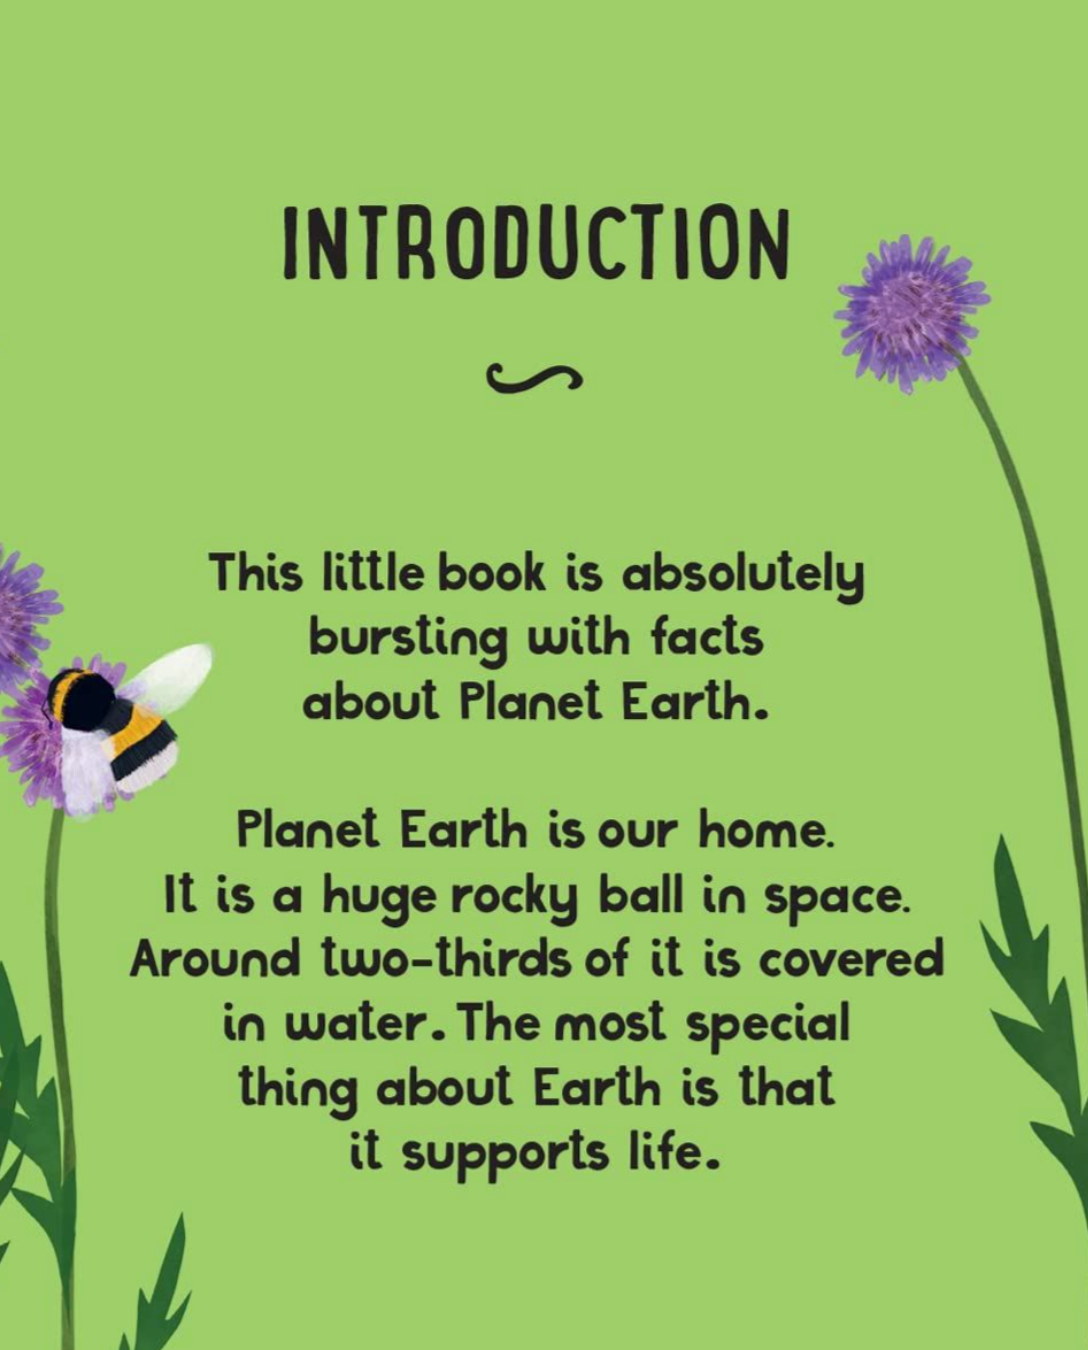 Small and mighty book of planet Earth